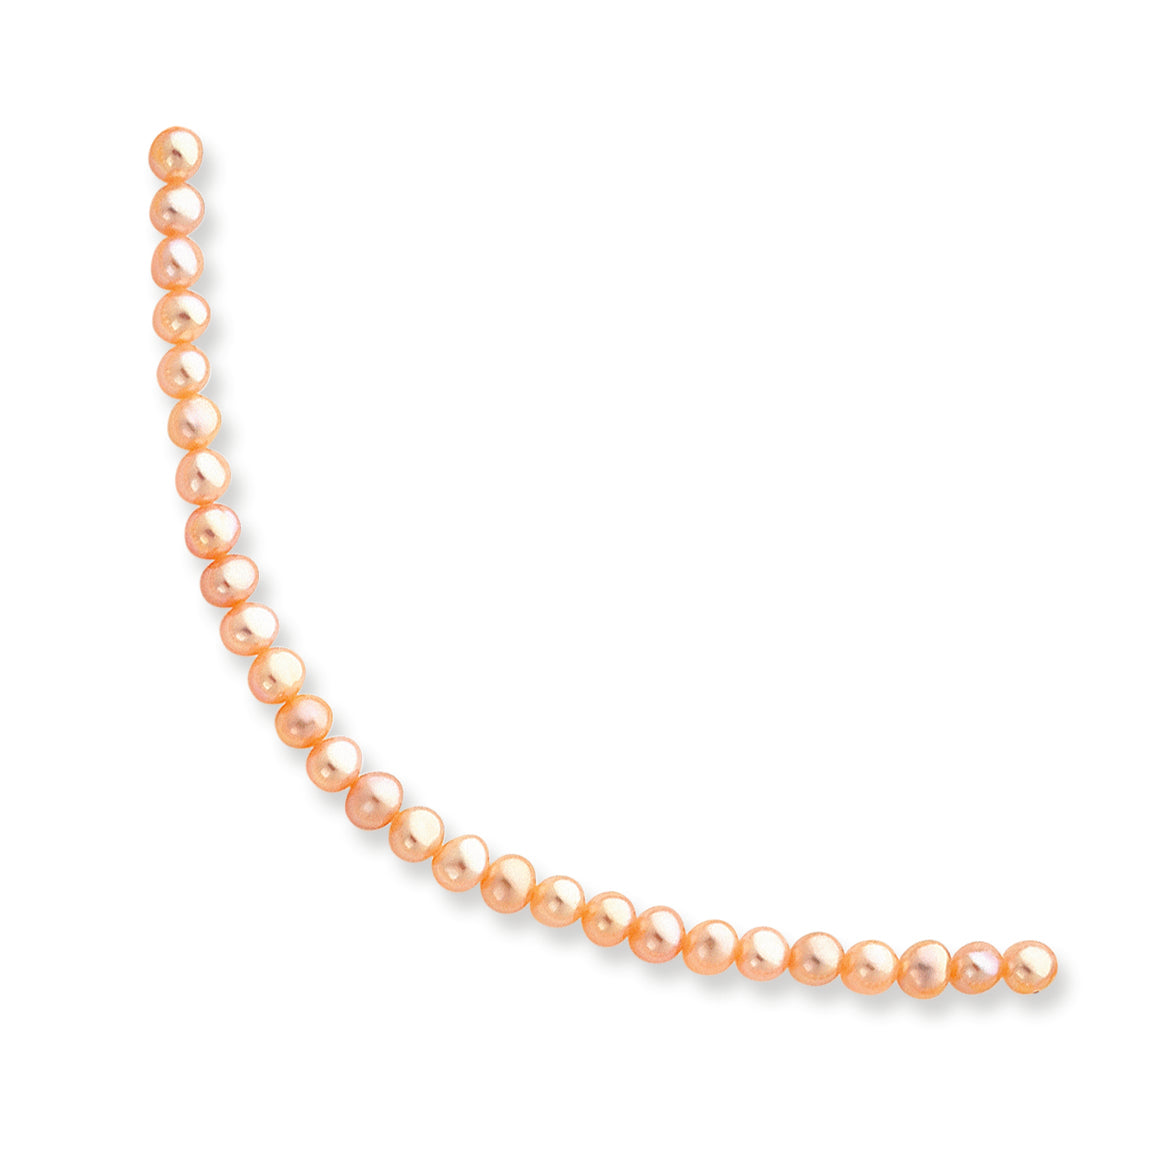 14K Gold 4.5-5mm Pink Freshwater Onion Cultured Pearl Necklace 18 Inches